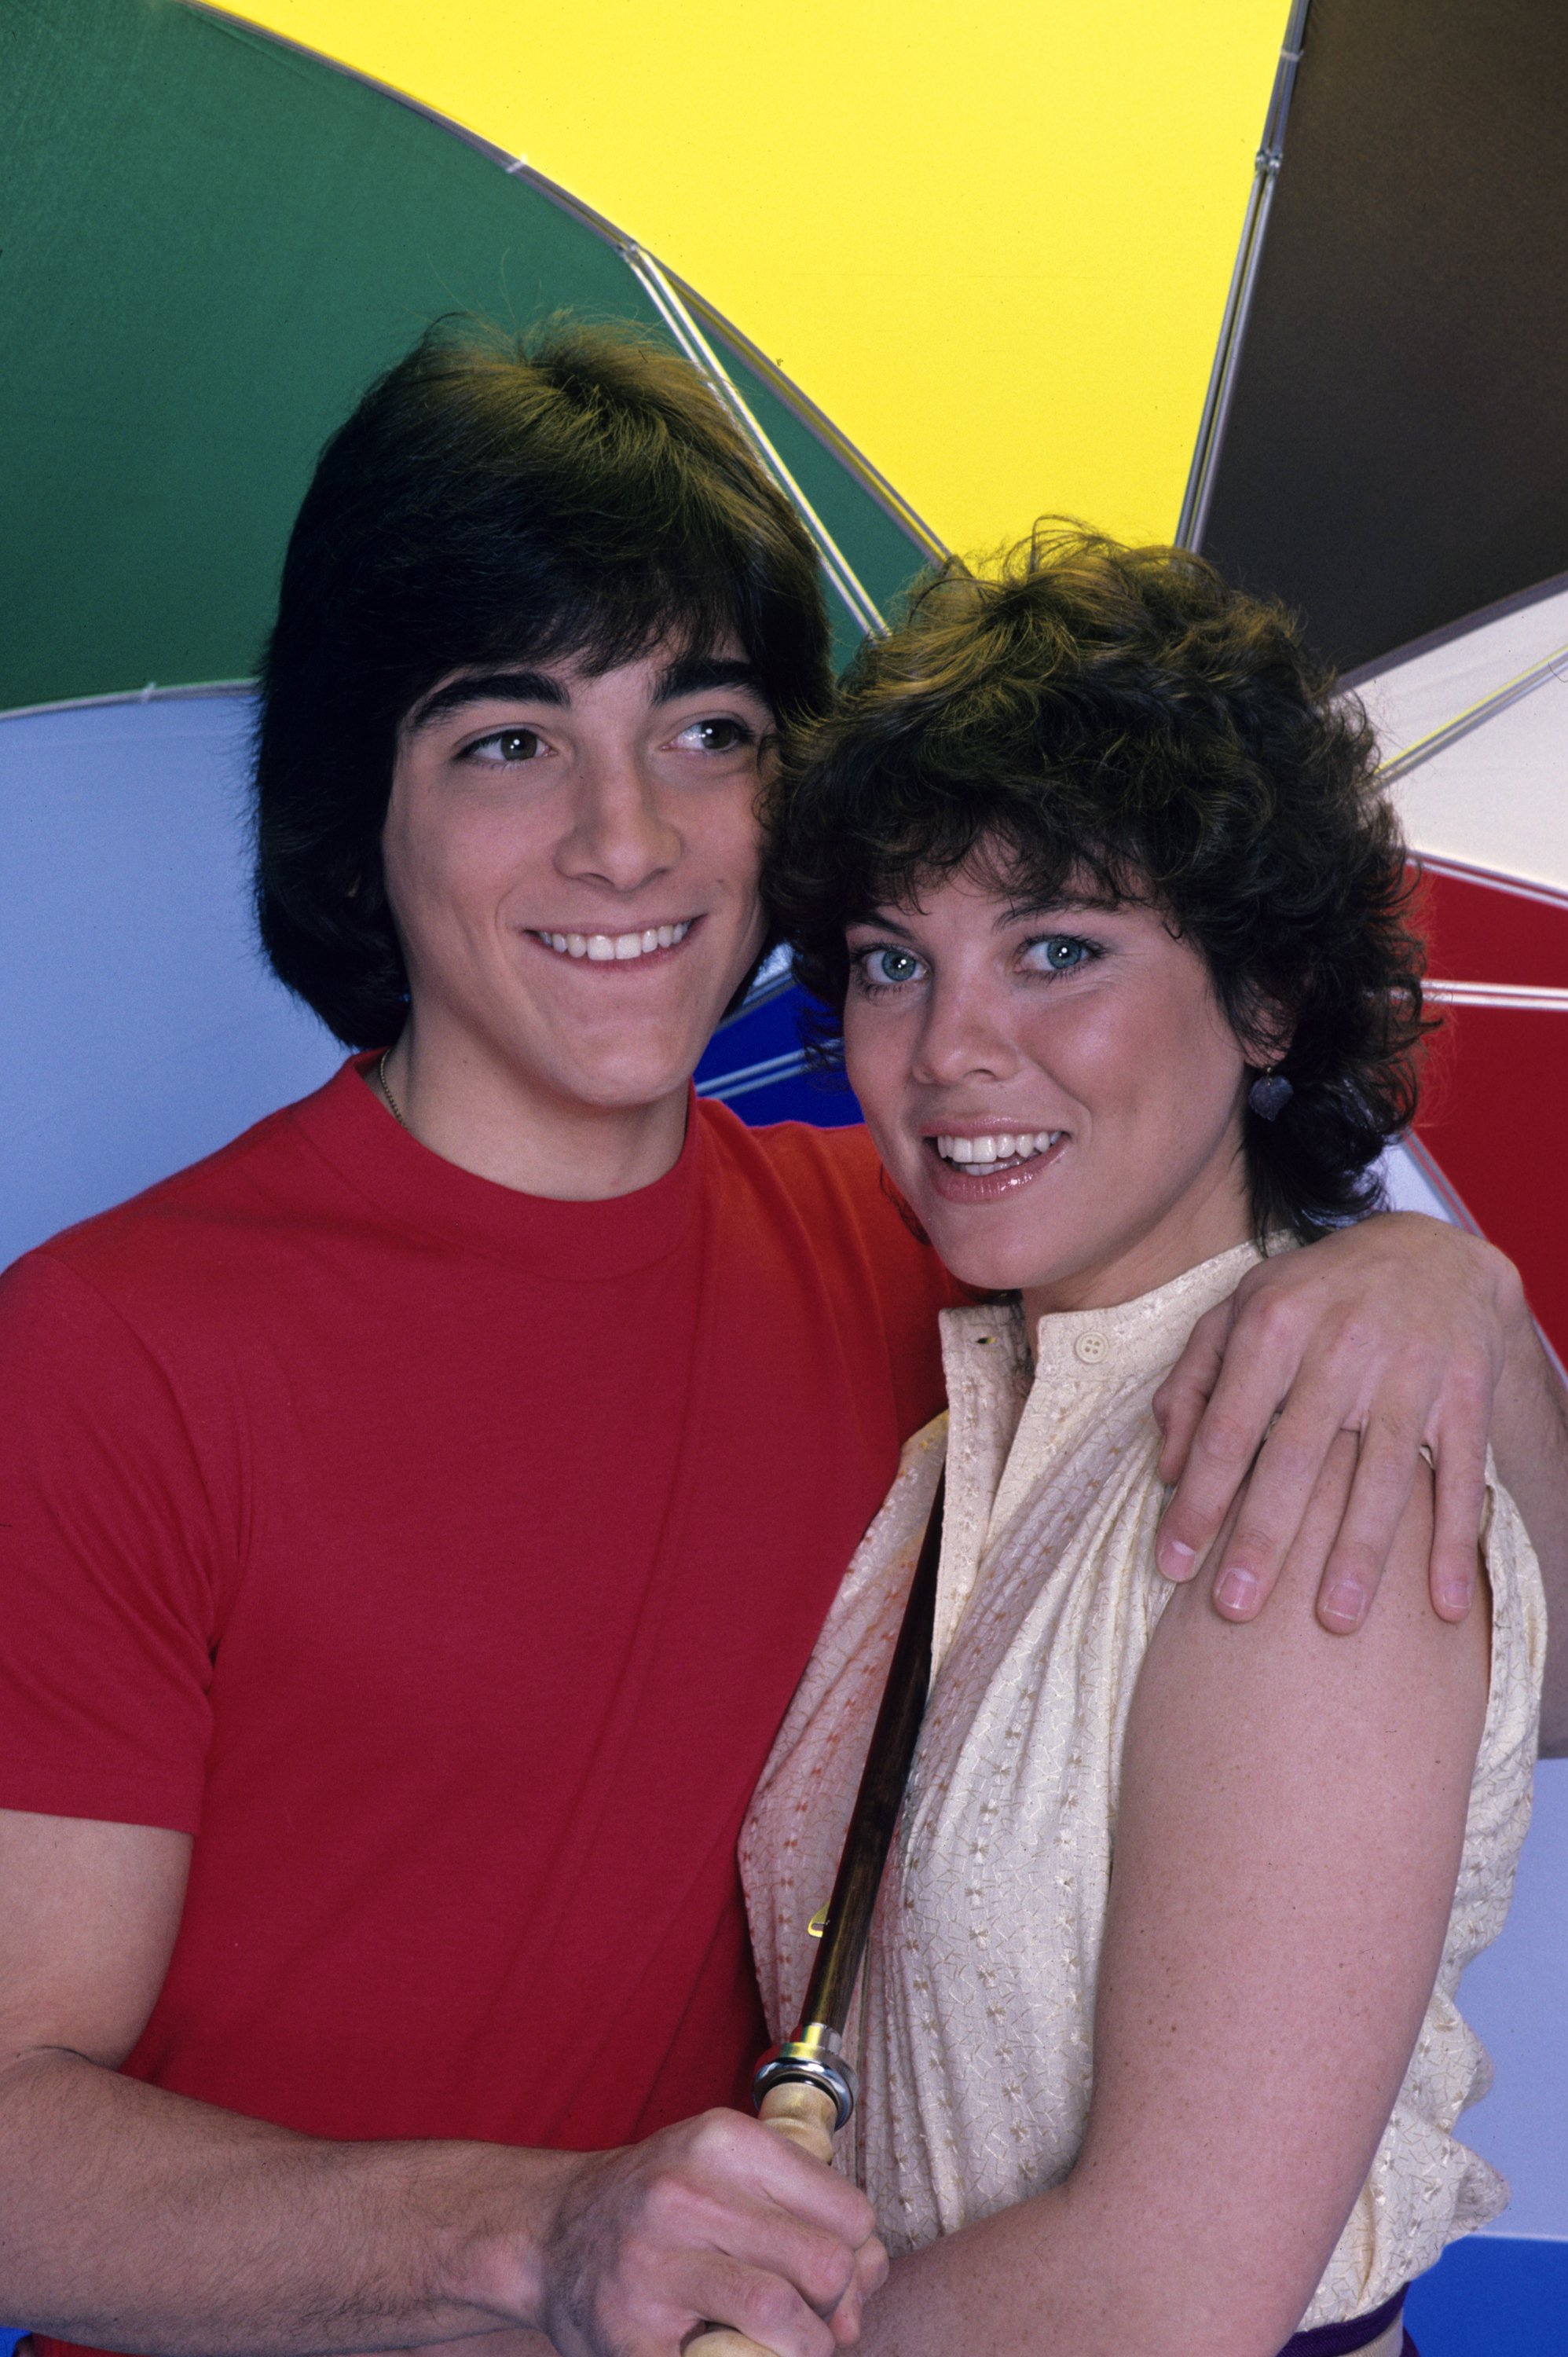 Scott Baio and Erin Moran in Season One of "Joanie Loves Chaci", March 23, 1982 | Source: Getty Images